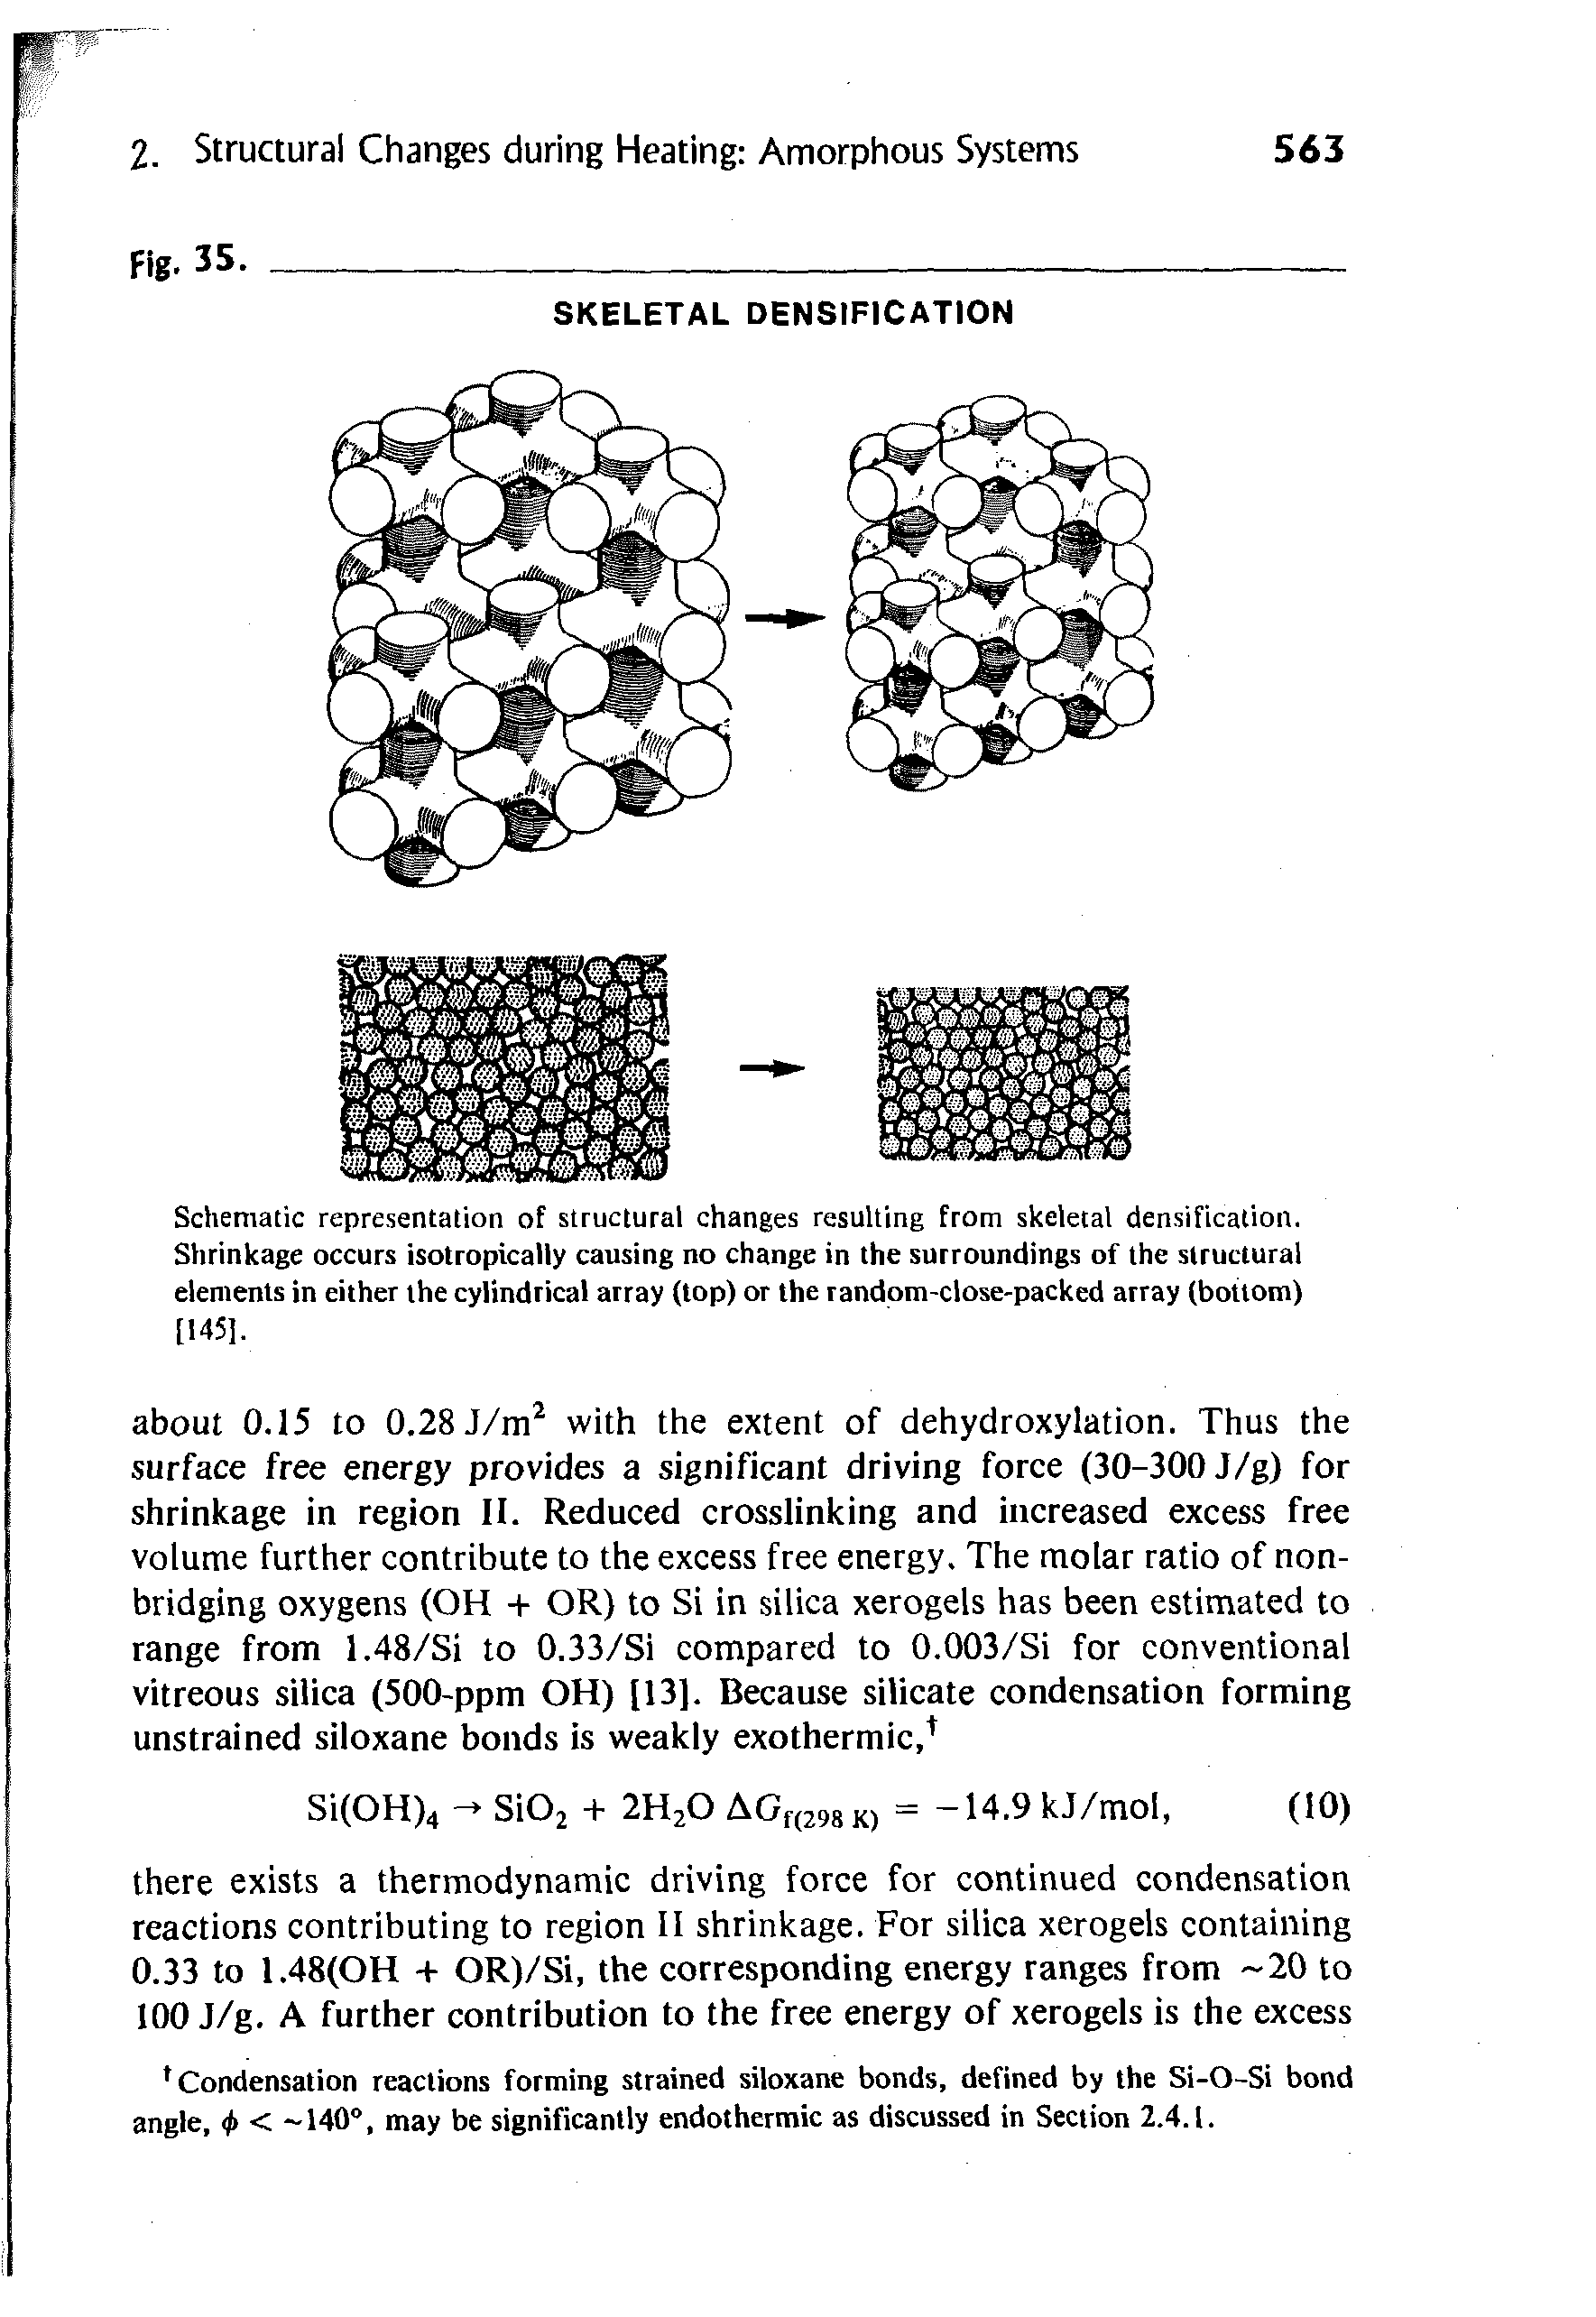 Schematic representation of structural changes resulting from skeletal densification. Shrinkage occurs isotropically causing no change in the surroundings of the structural elements in either the cylindrical array (top) or the random-close-packed array (bottom) [1451.